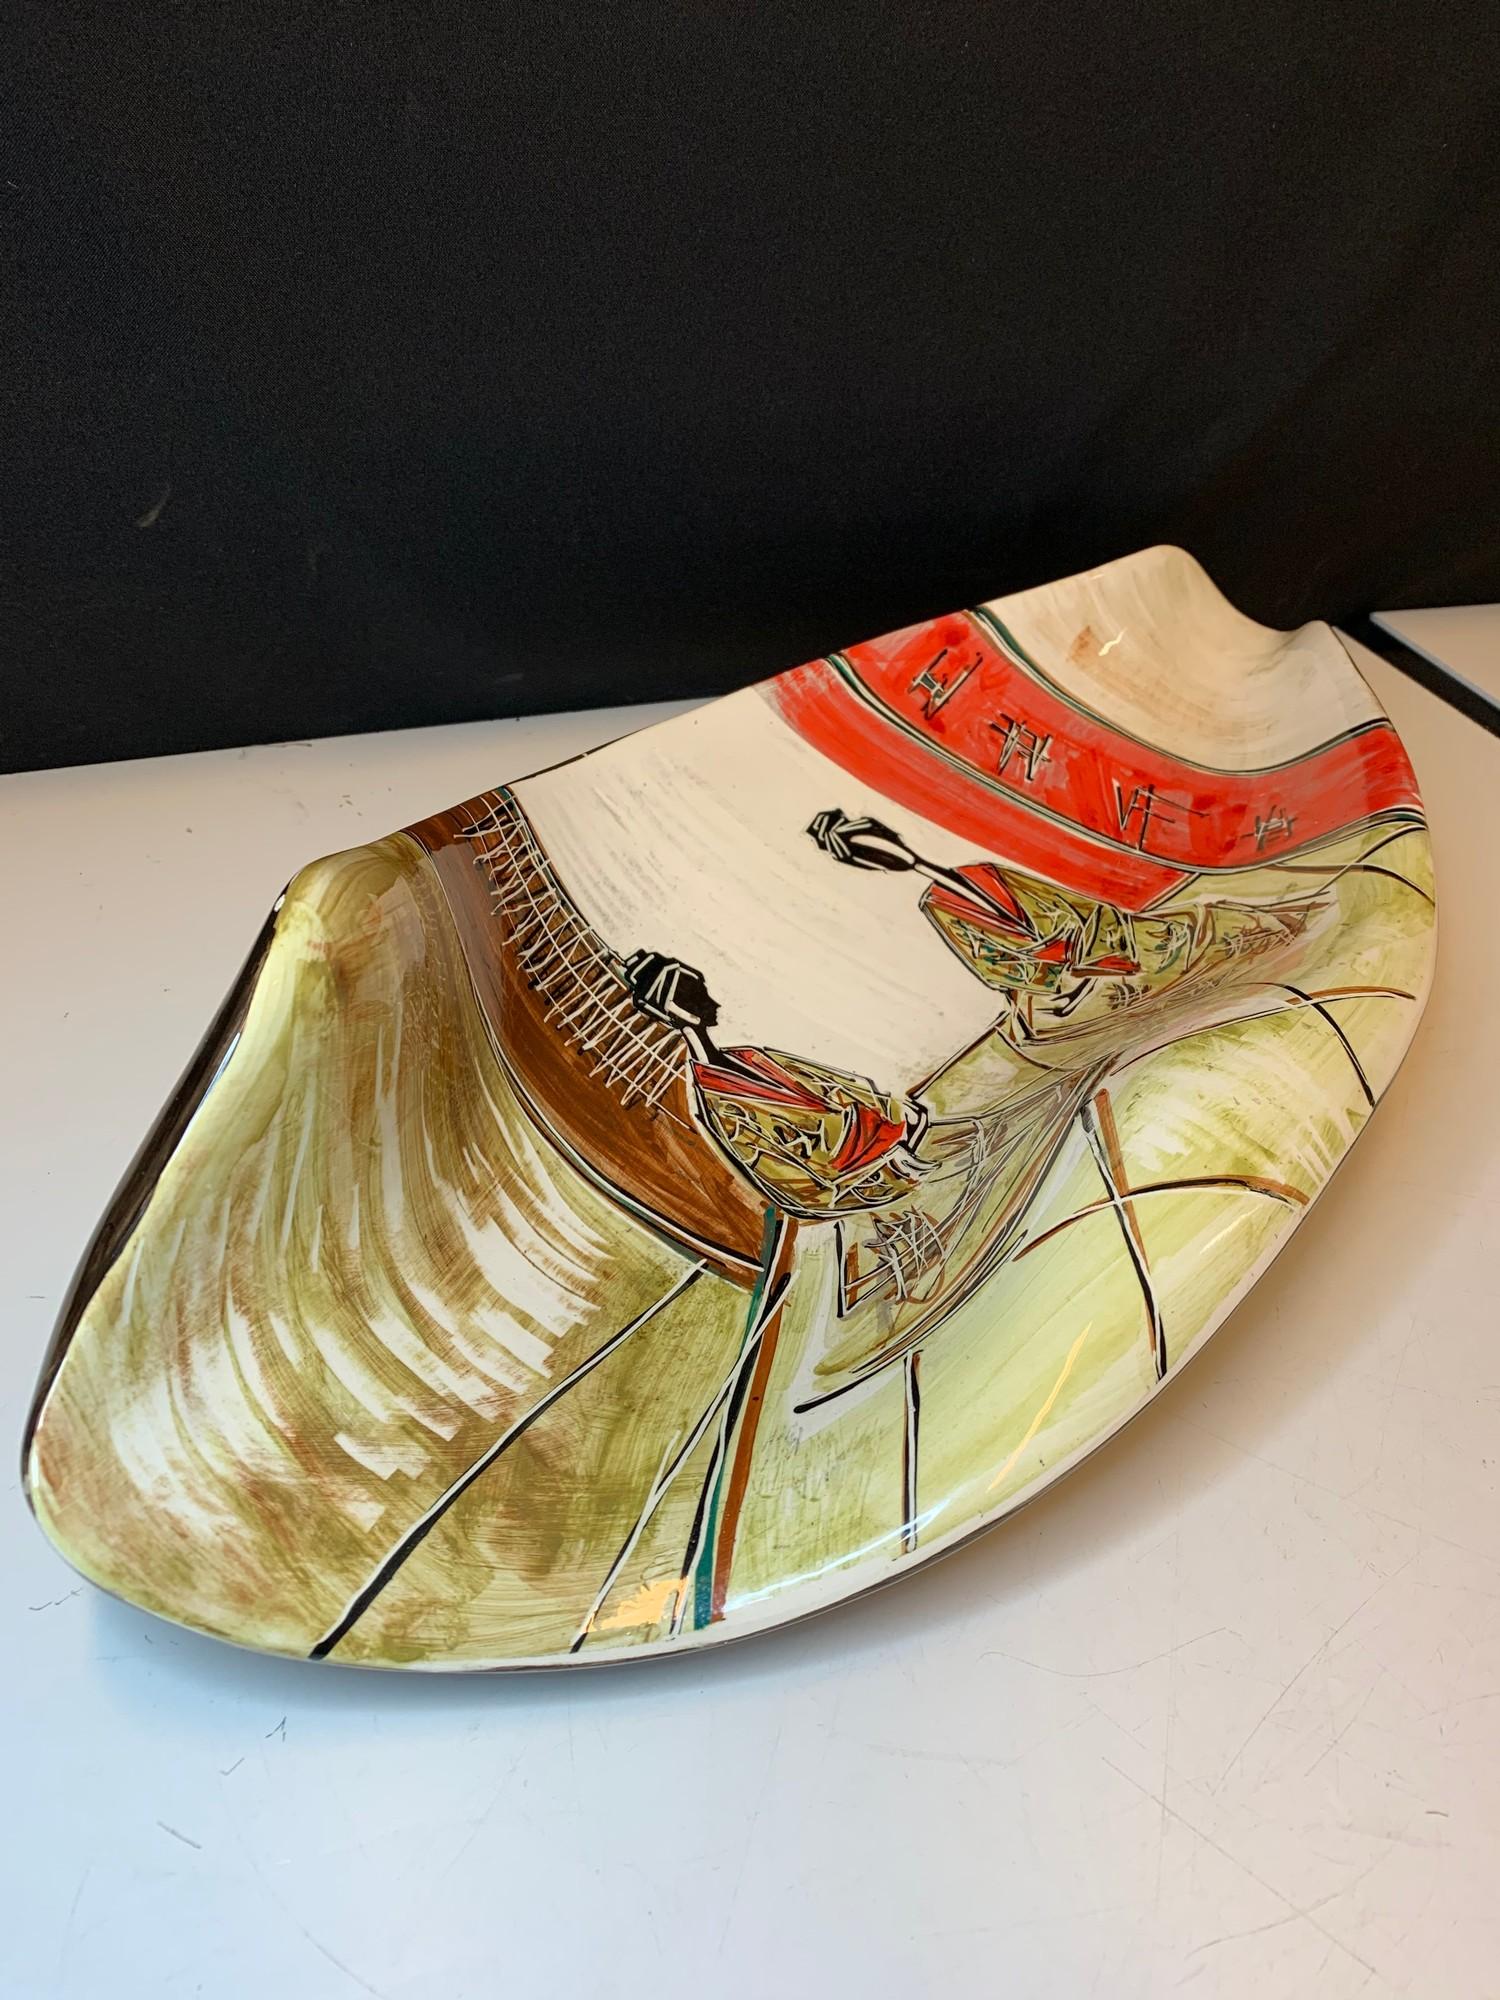 Italian ceramic 1950s style hand painted with the Japanese influence. Signed by Donatella - Image 5 of 7